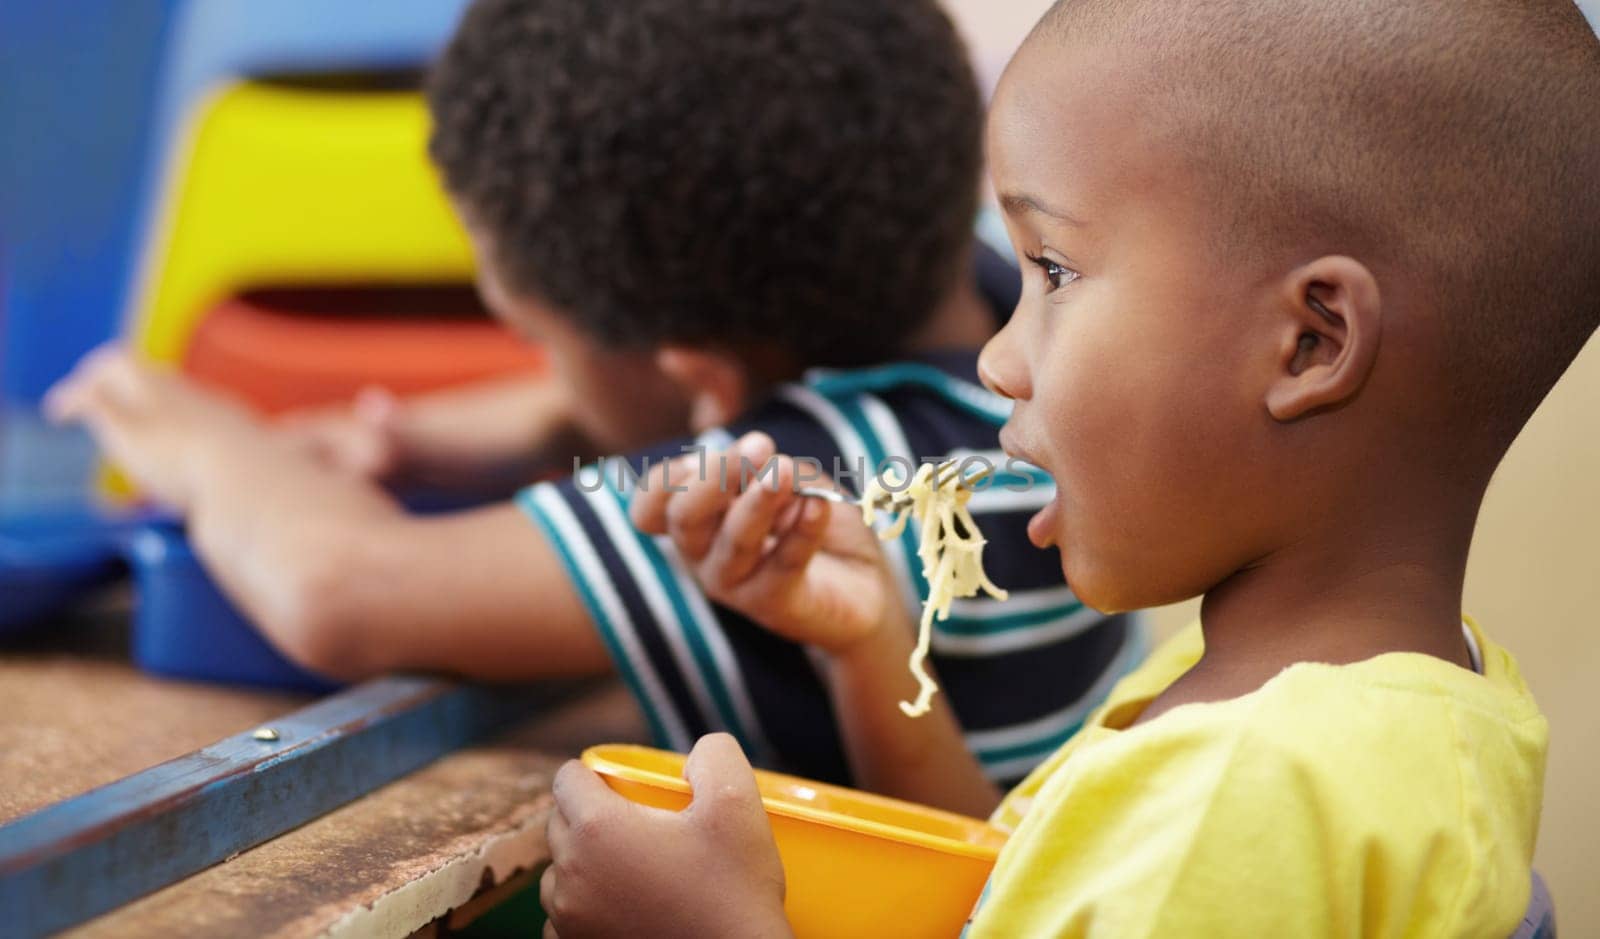 Child, lunch and eating in school, kindergarten or classroom and healthy nutrition, food and noodles. Kids, black boy and hungry kid or eat snack, pasta in lunchbox or breakfast in kindergarden.